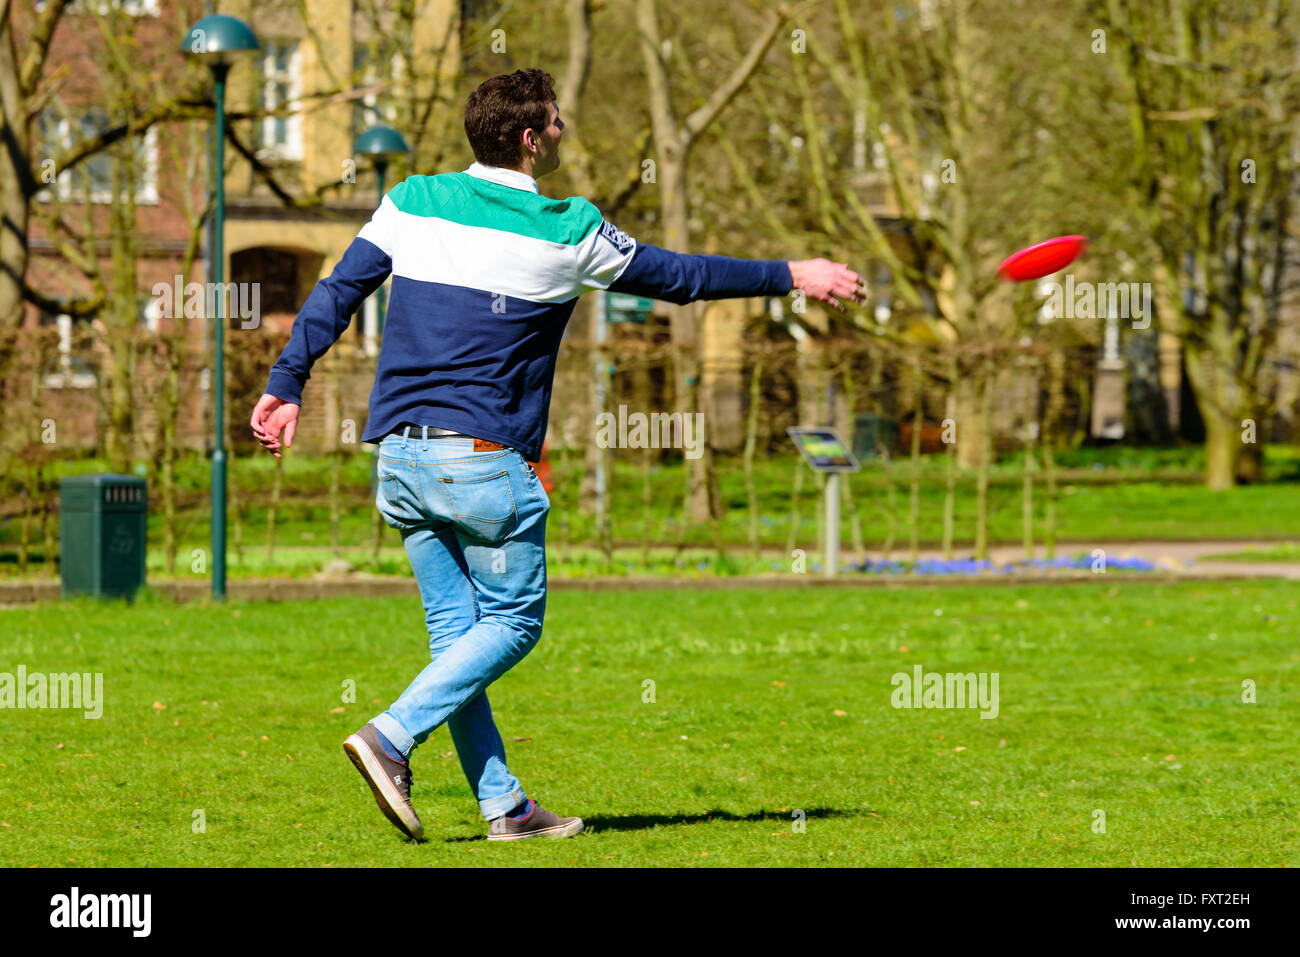 Lund, Sweden - April 11, 2016: Everyday city life. Young adult man in a park is throwing a flying disc to the side. Stock Photo